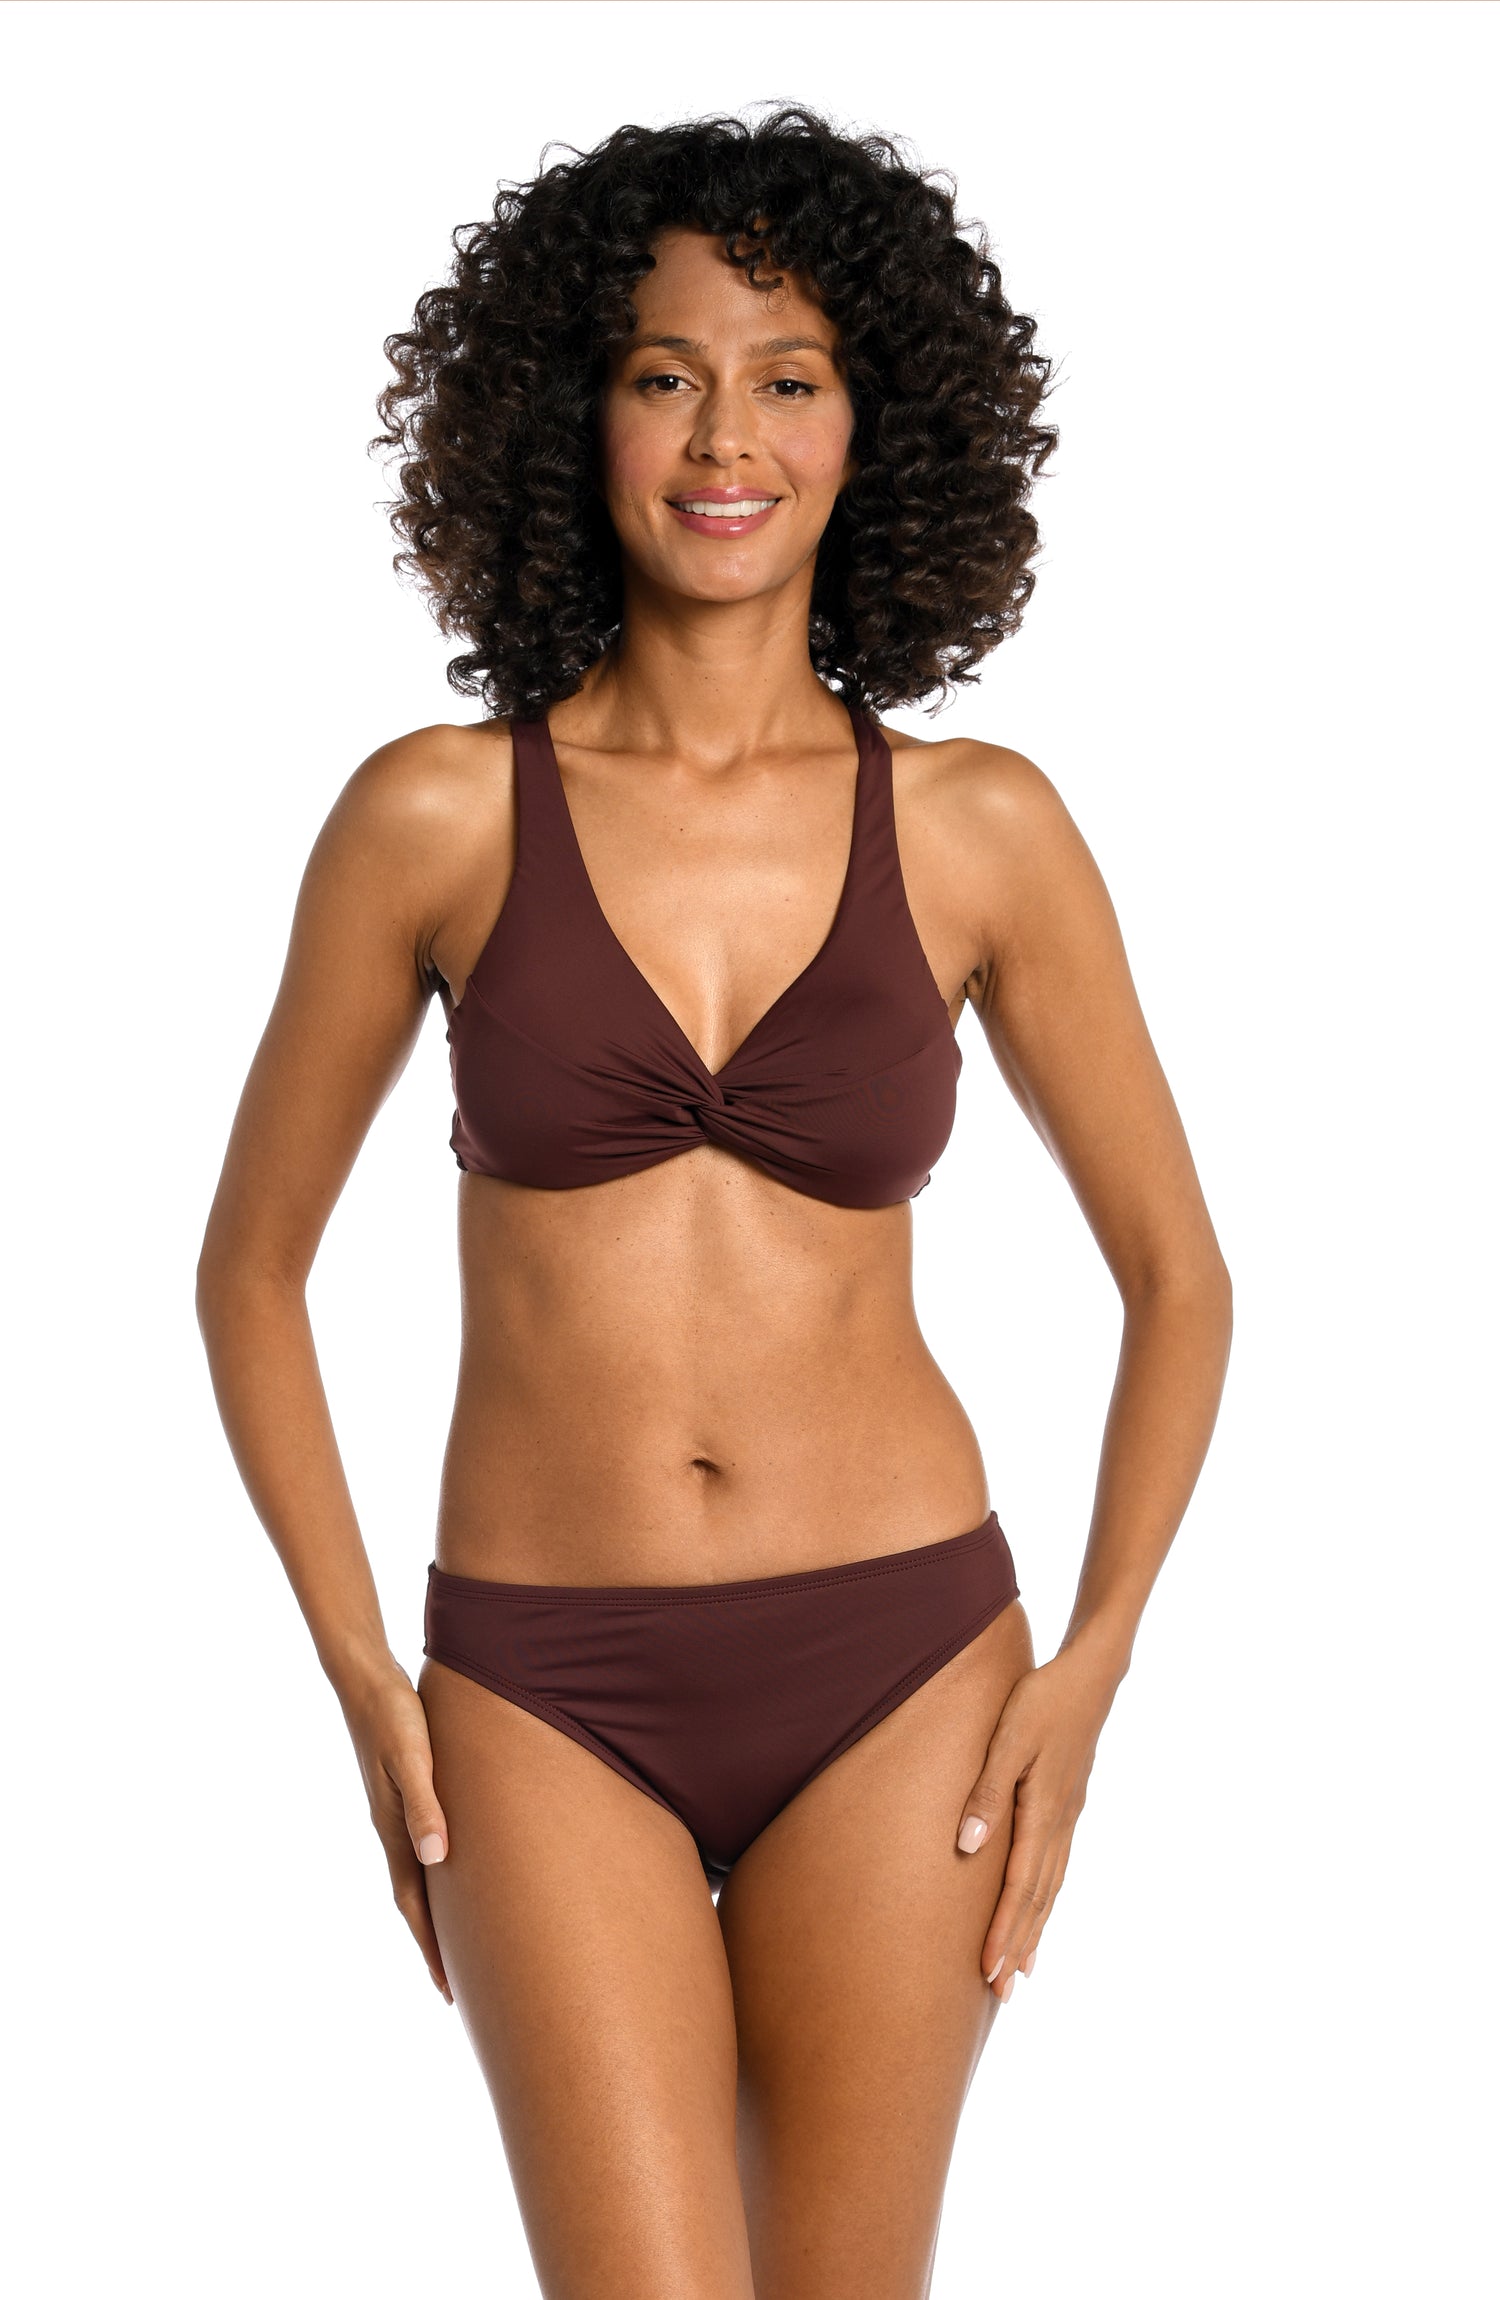 Model is wearing a solid brown colored twist front underwire bikini top from our Best-Selling Island Goddess collection.